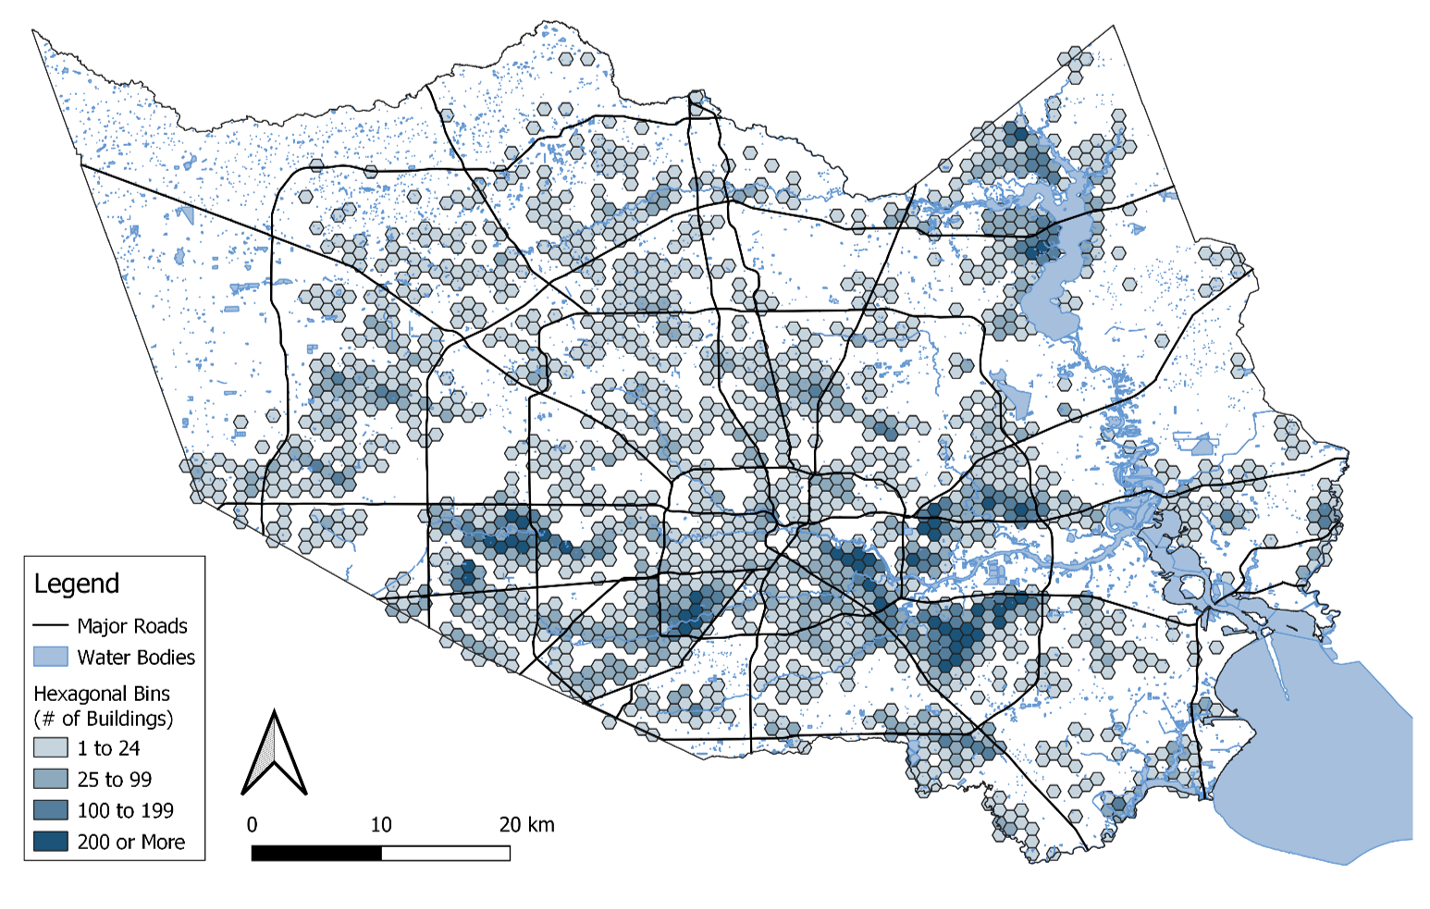 Map of Harris County, Texas during Hurricane Harvey, where each hexagonal bin symbolizes the number of residential buildings that would not have flooded without the added impact of climate change.